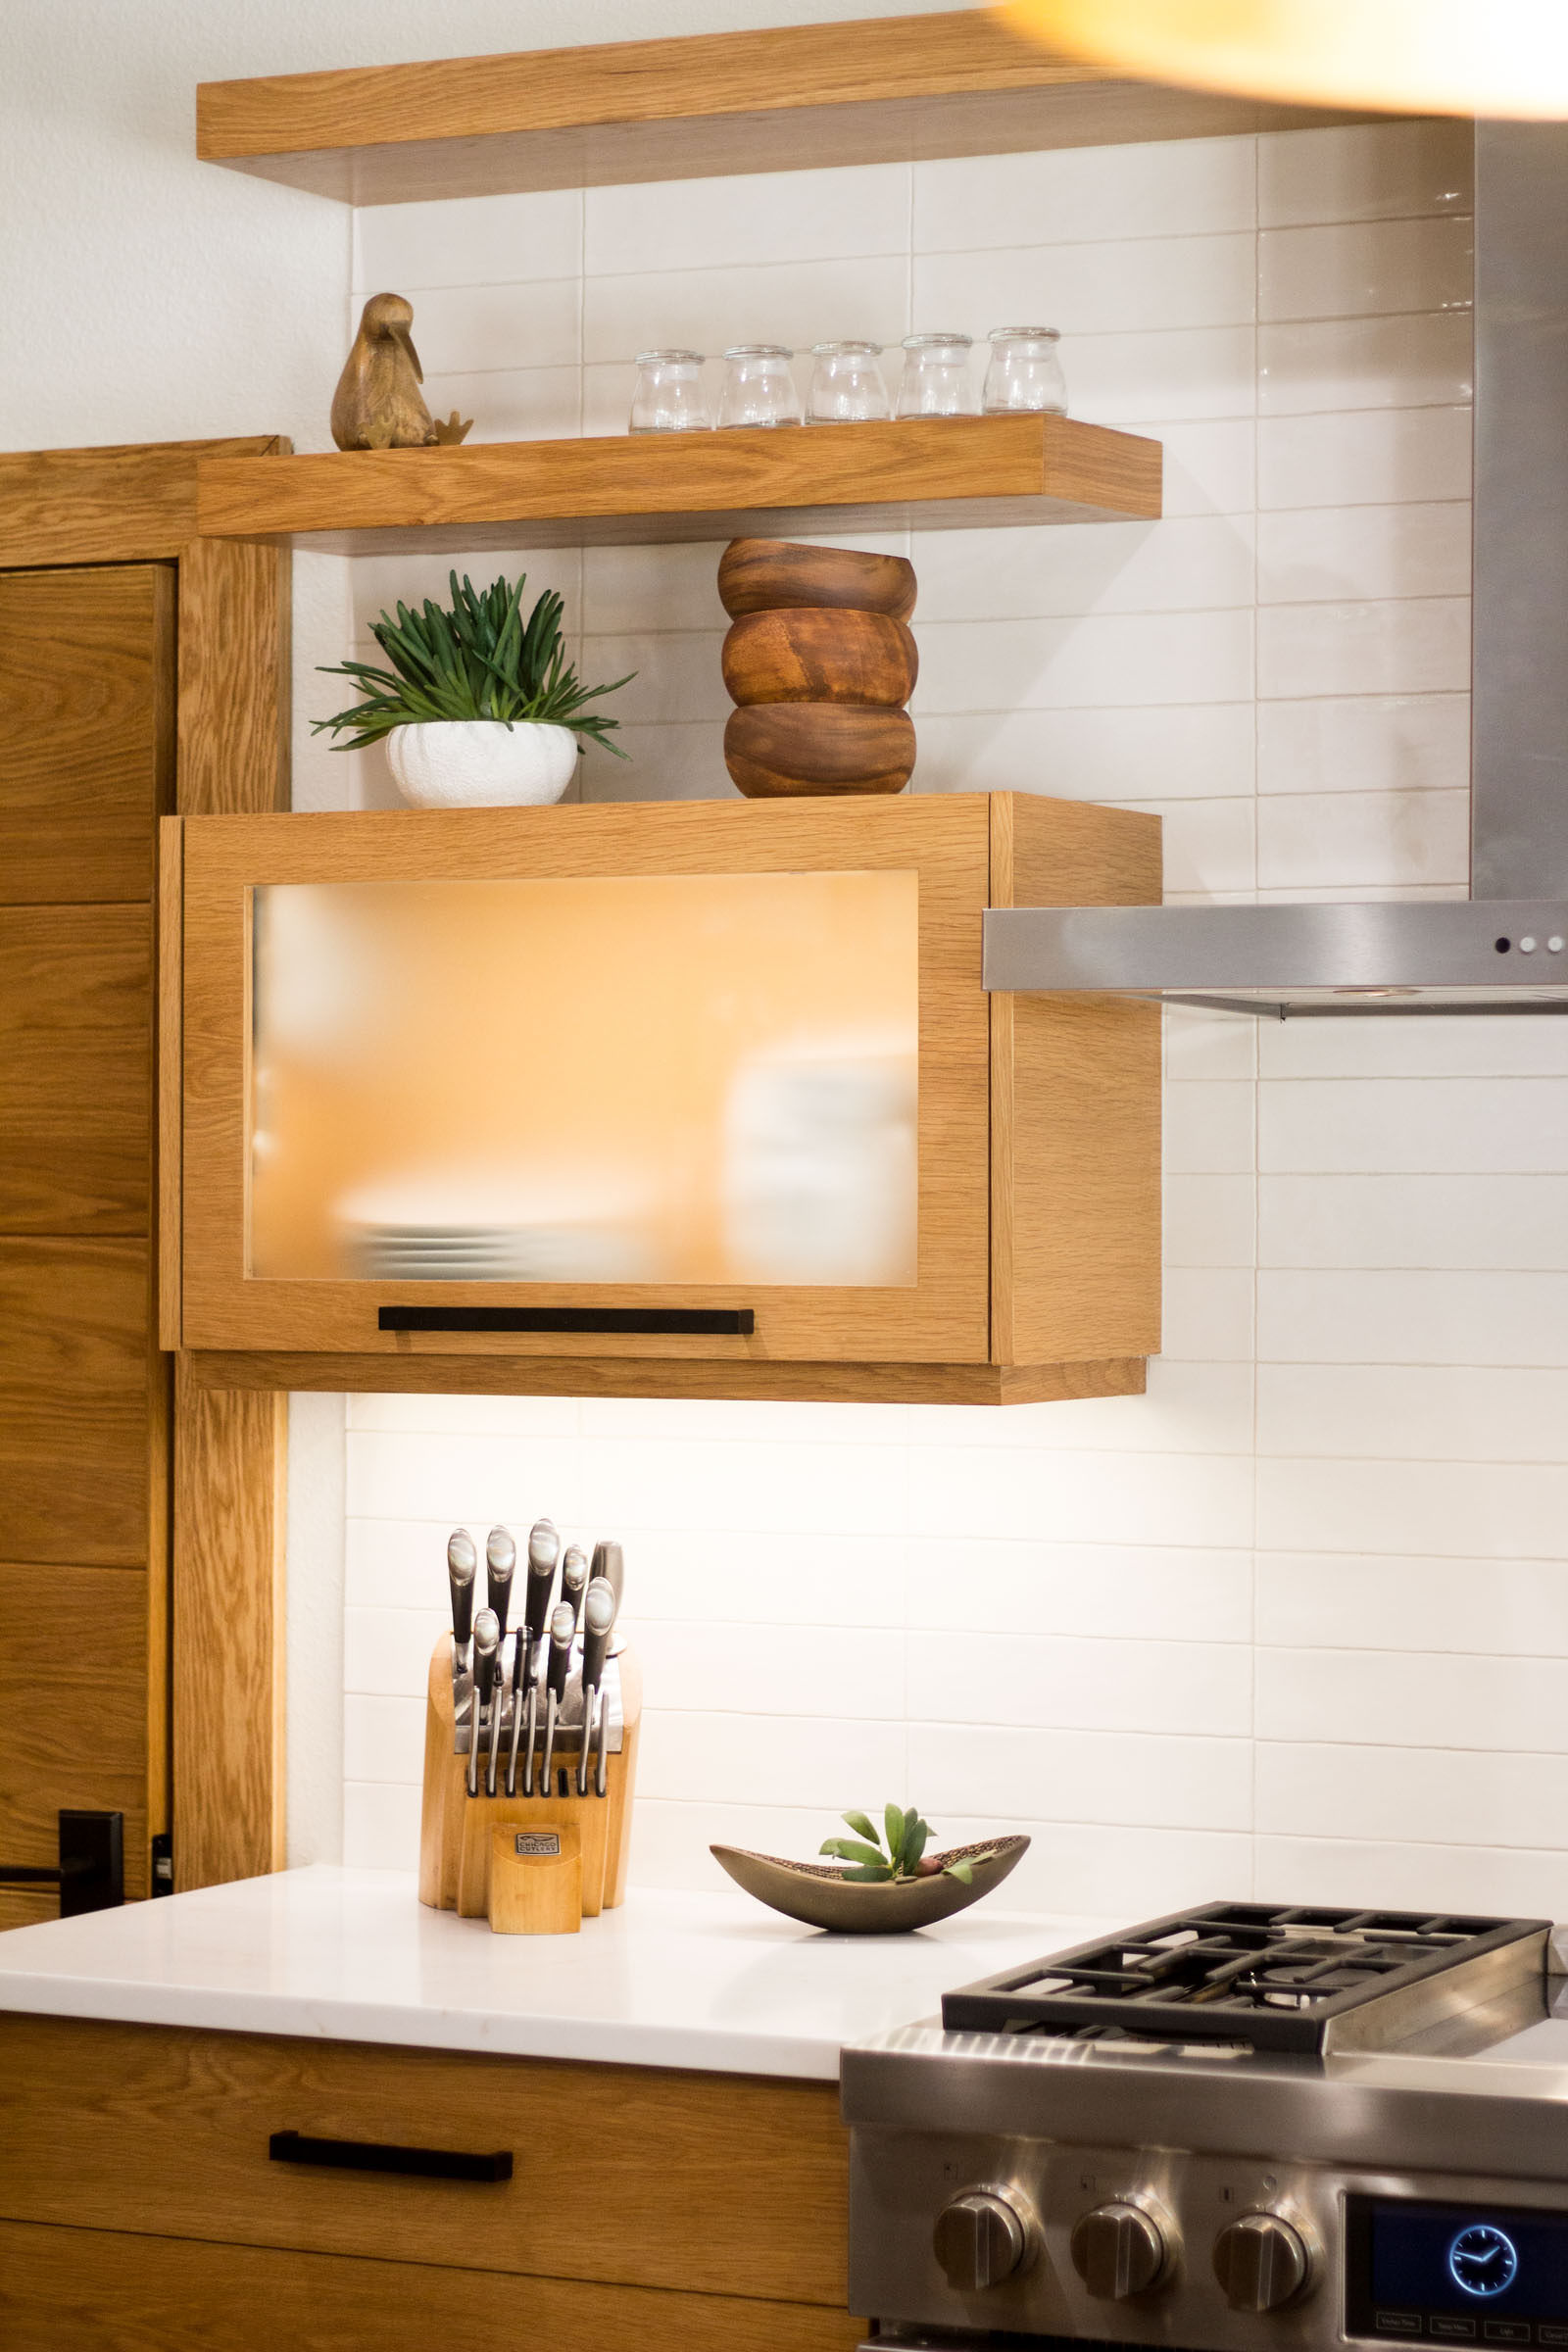 Stainless steel gas cooktop, exposed shelves, succulents, vertical lift cabinets made of blonde wood